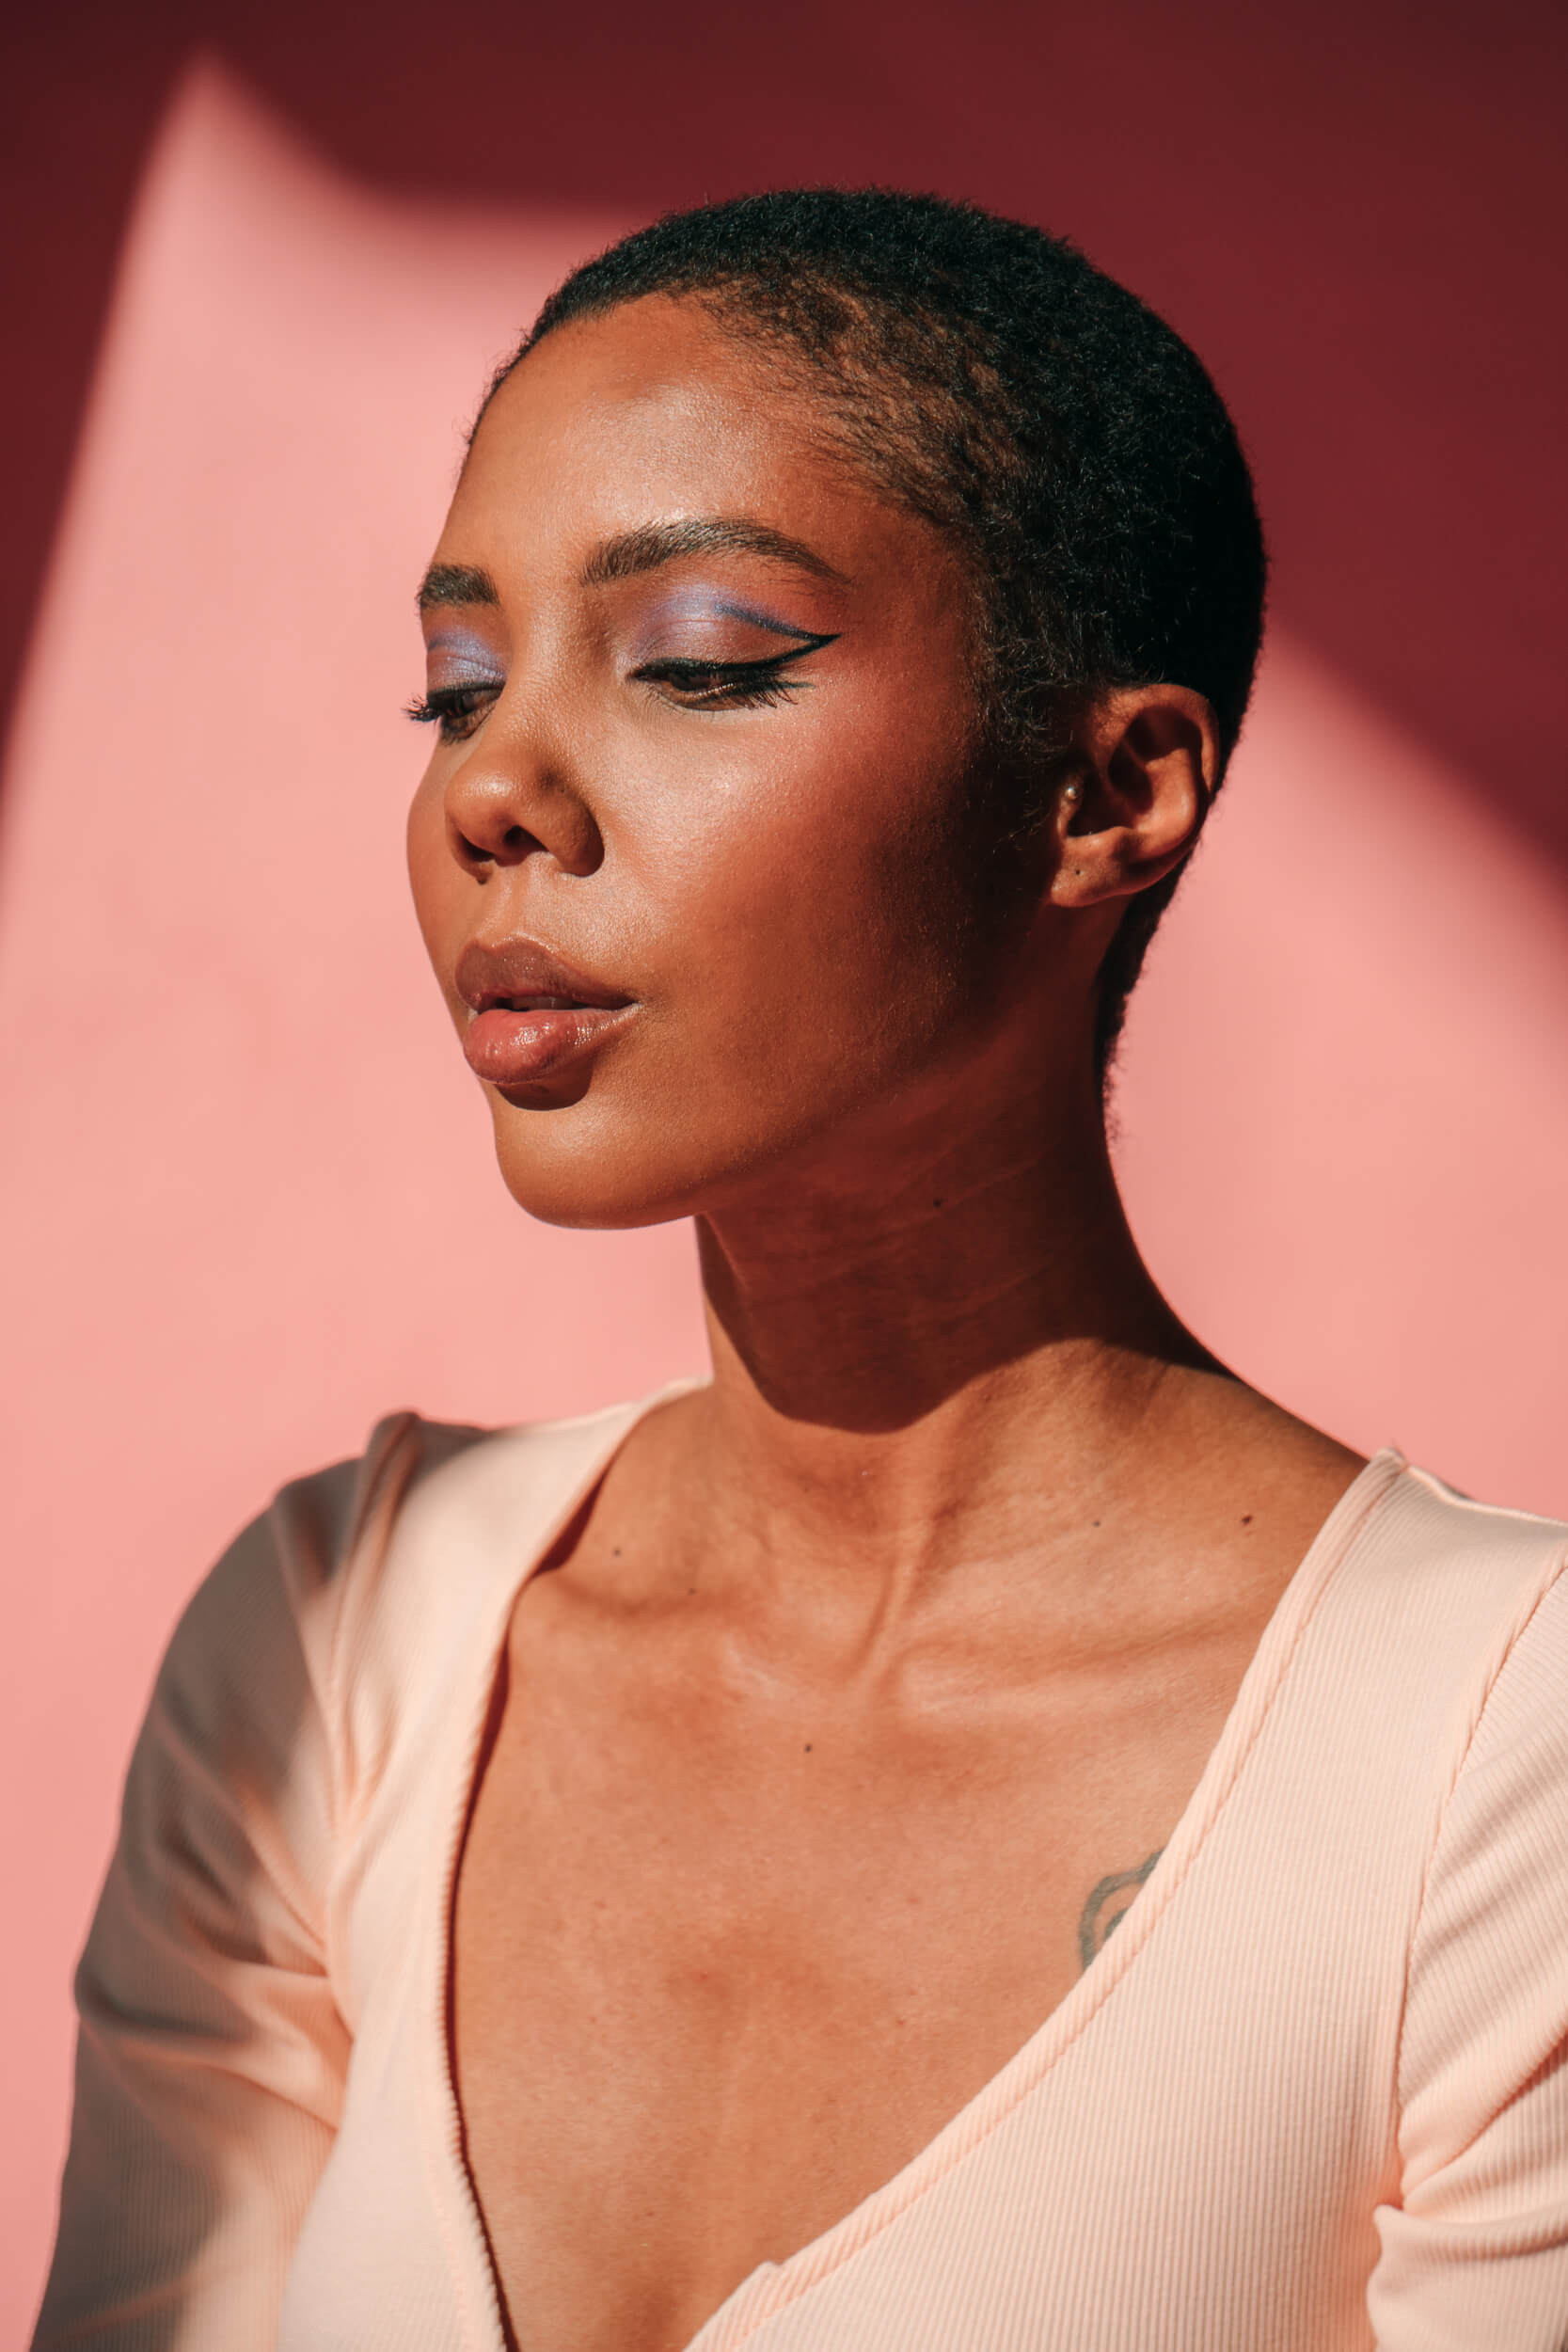 Pink Beauty Editorial